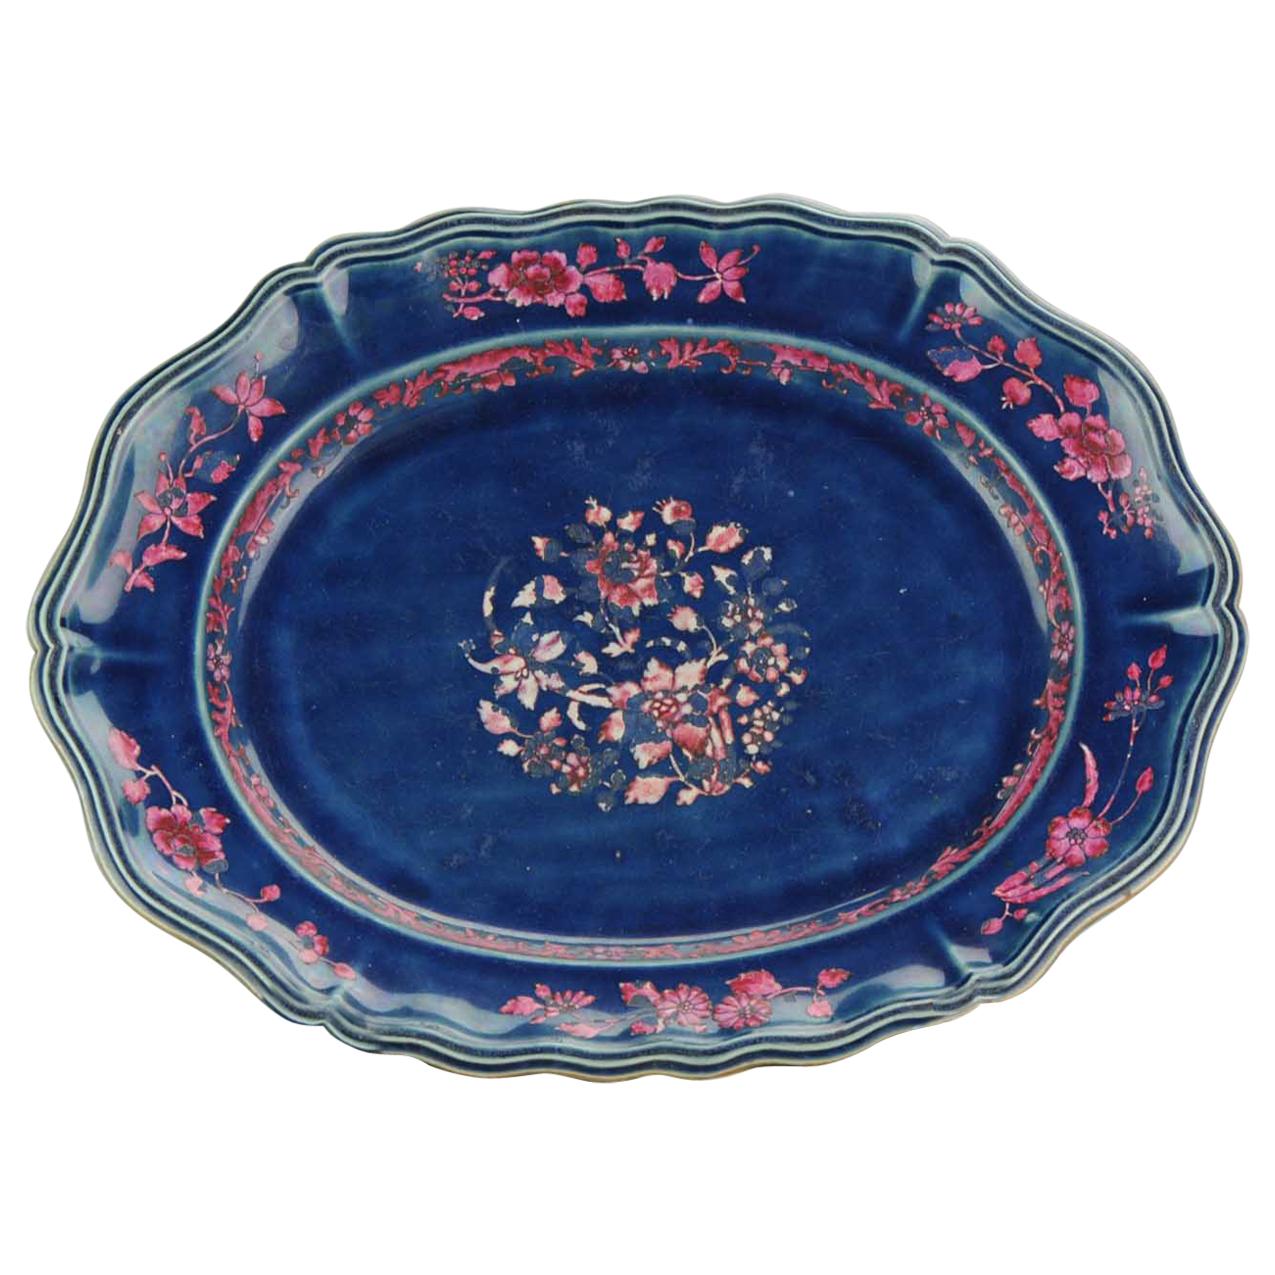 18th Century Large Serving Dish Qing Chinese Porcelain Blue Ground with Pink